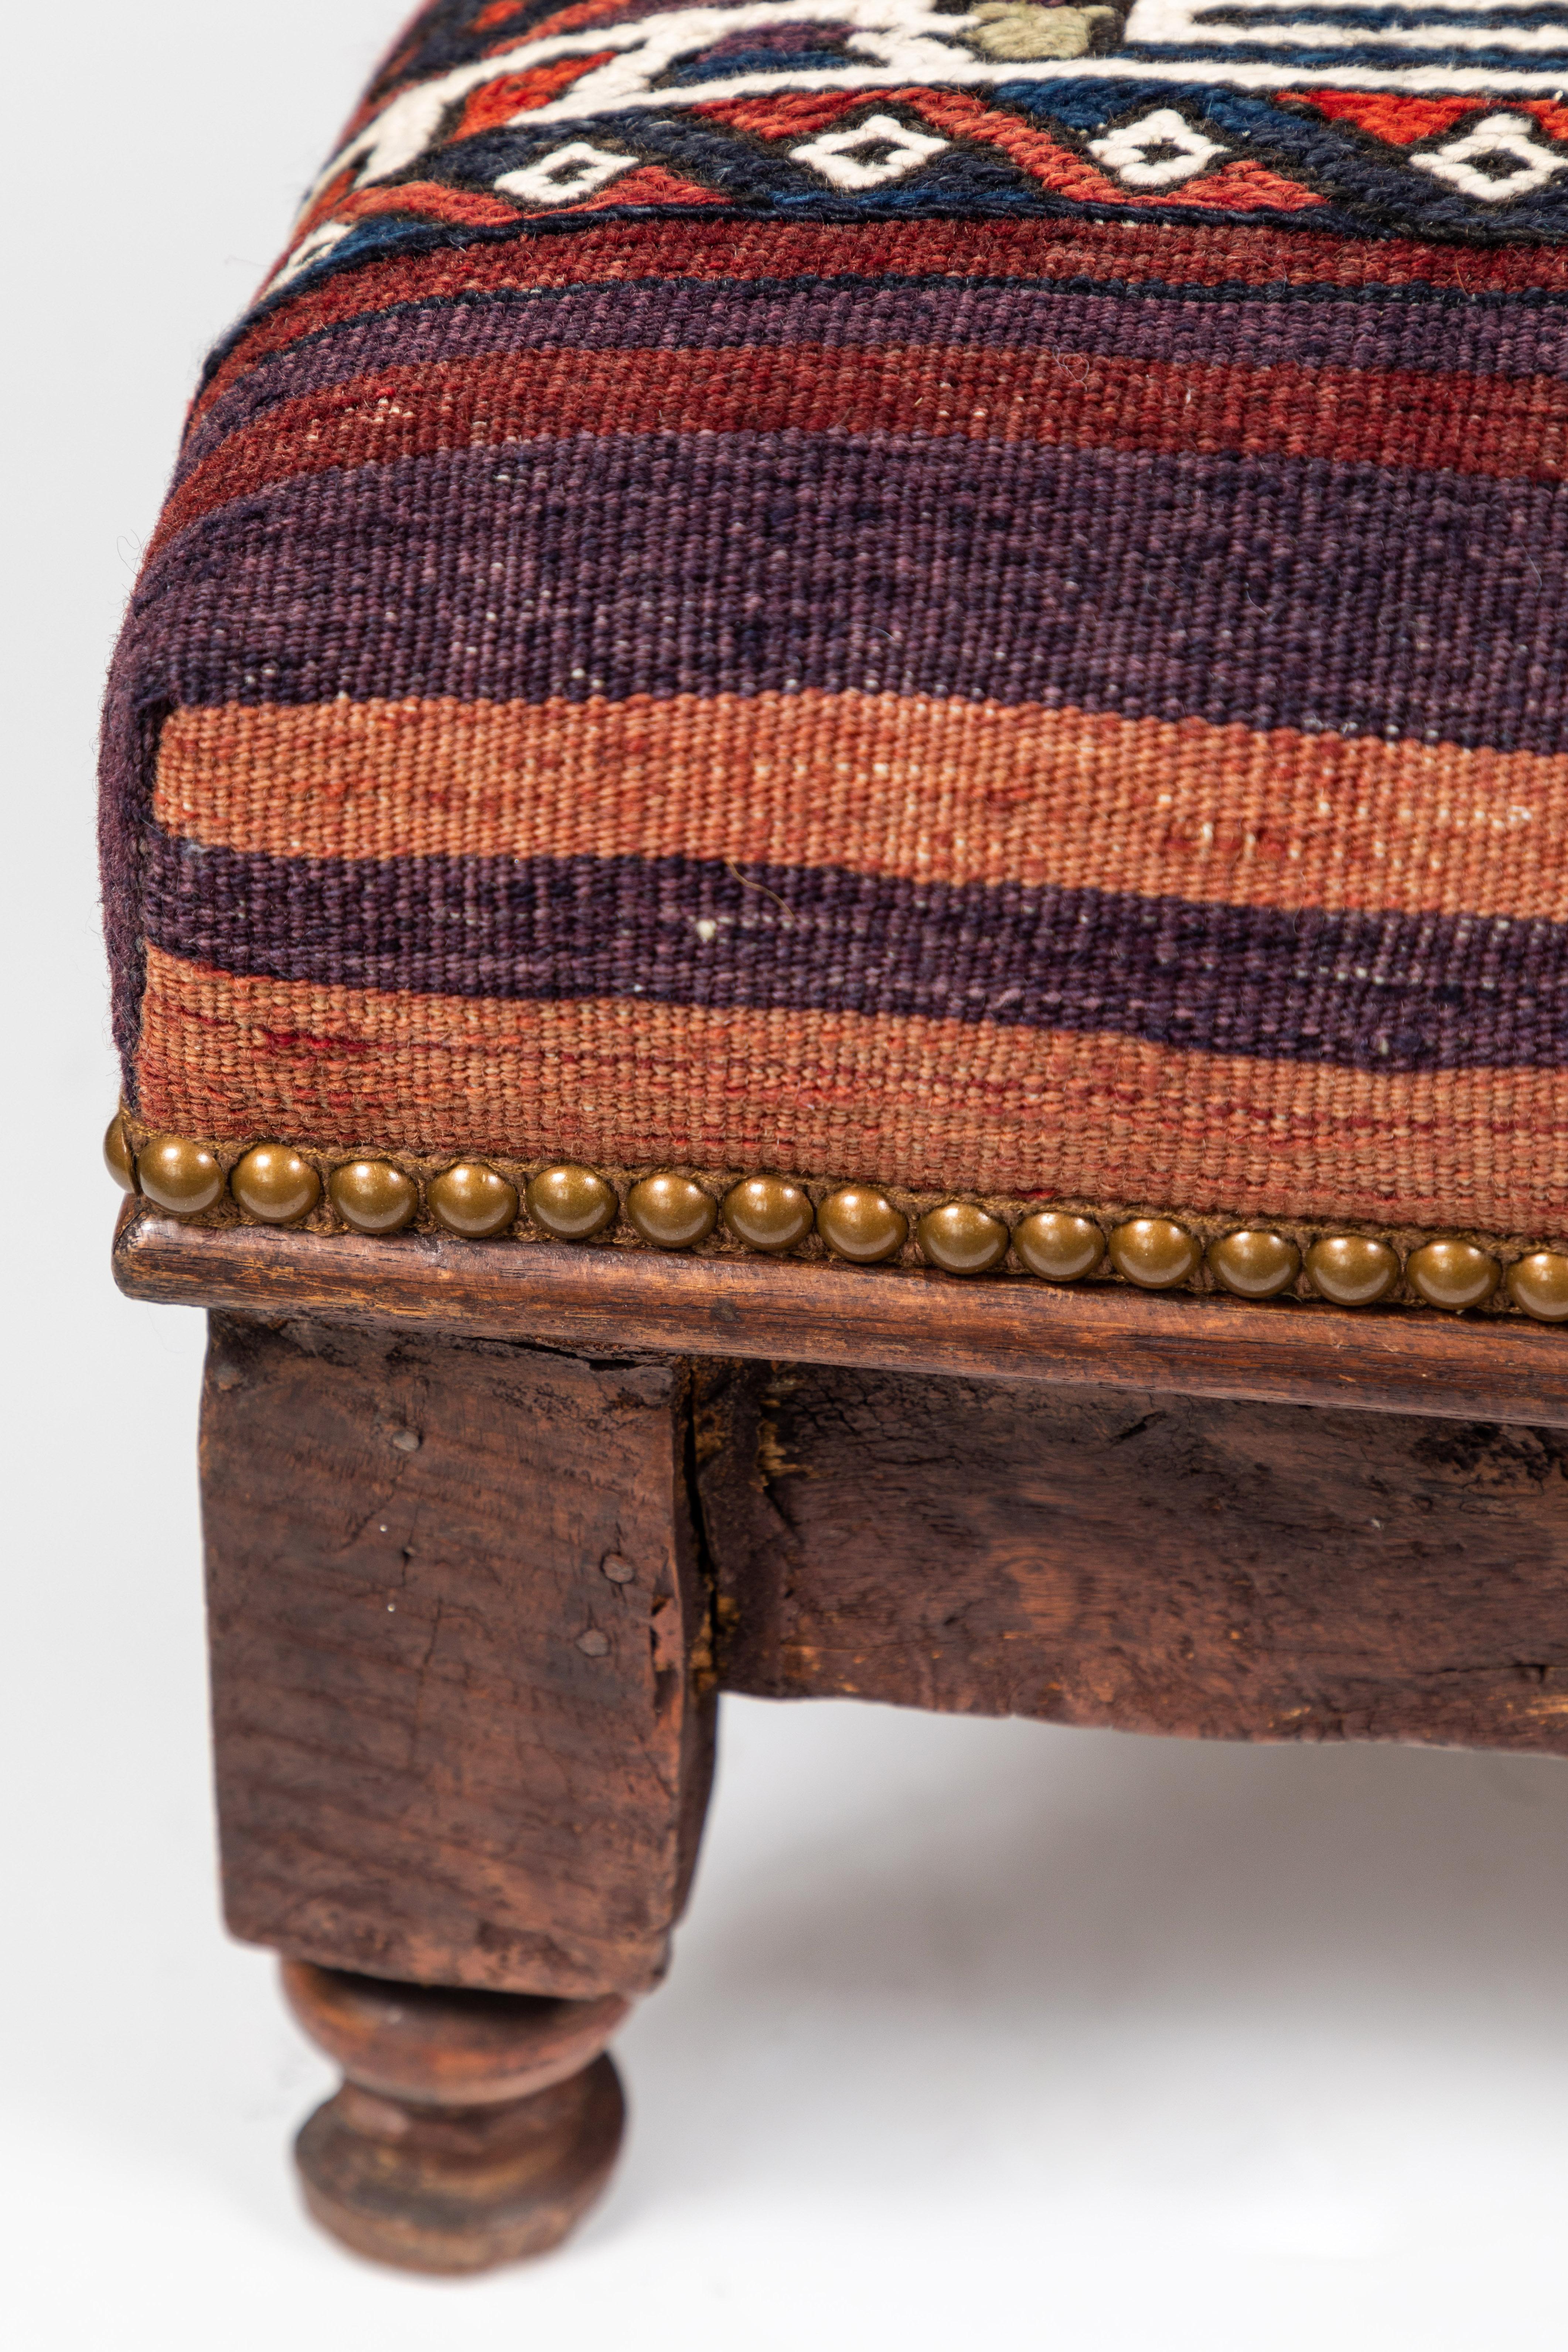 20th Century Vintage Wood Foot Stool Newly Upholstered in a Vintage Wool Rug from Turkey